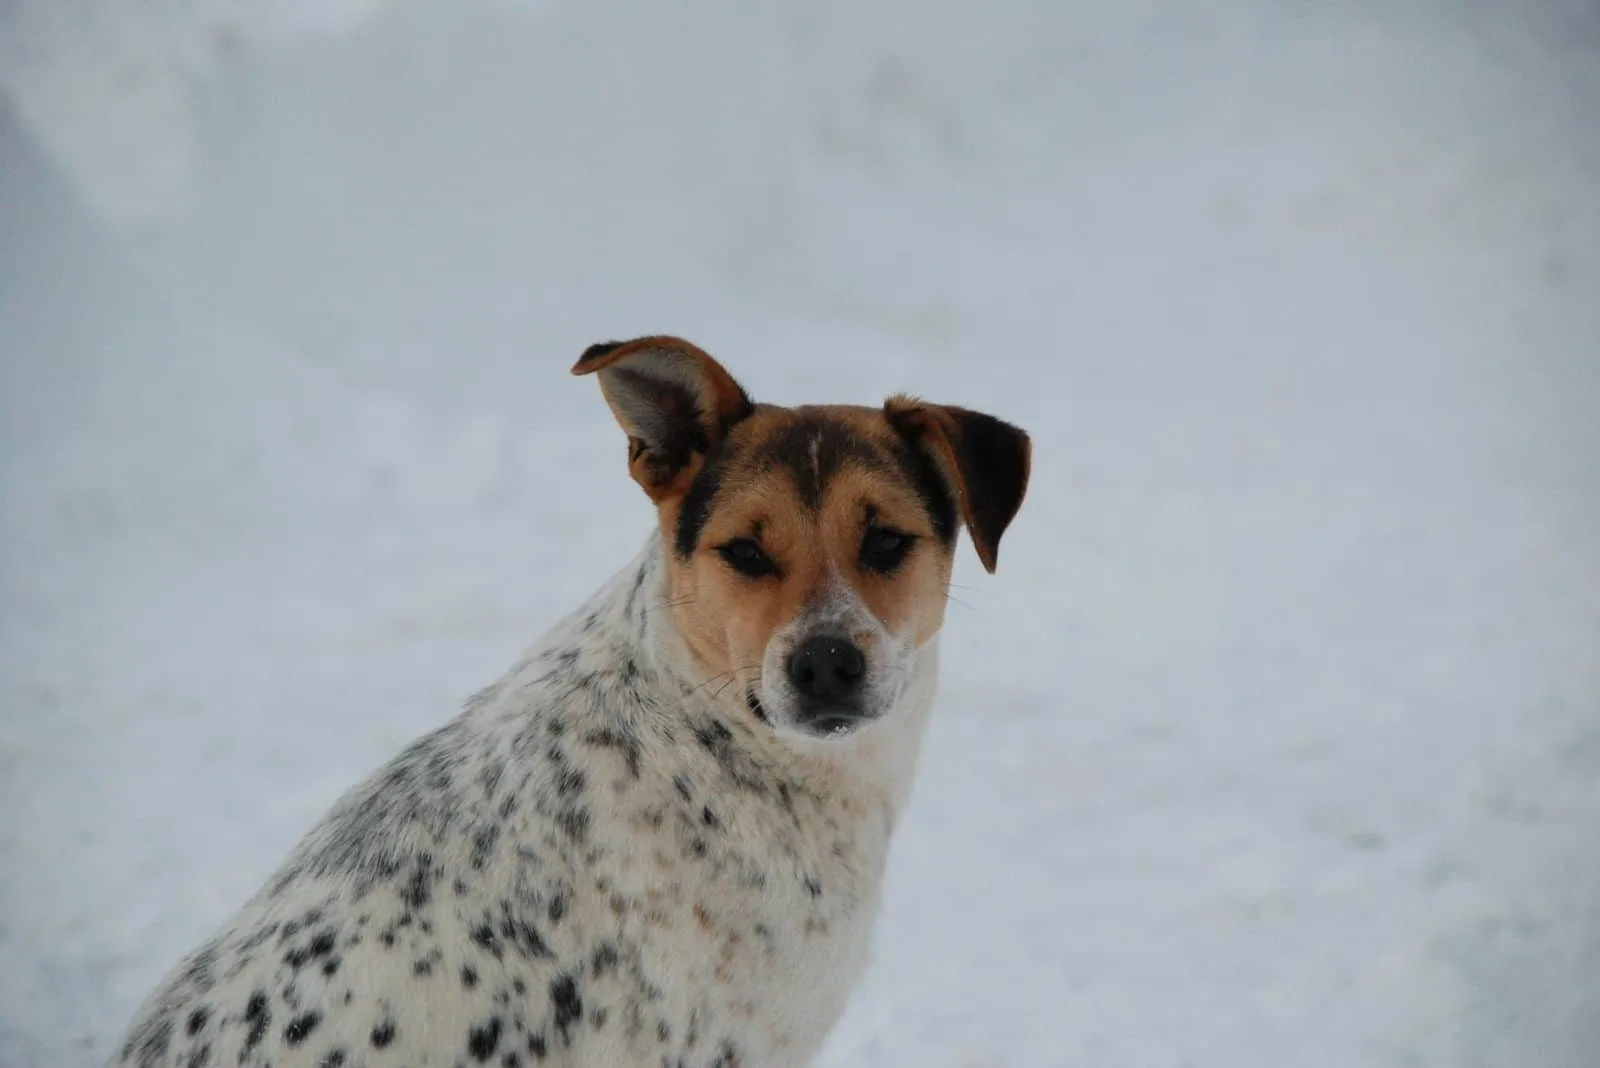 dalmatian mix dog with one ear raised standing in the snow